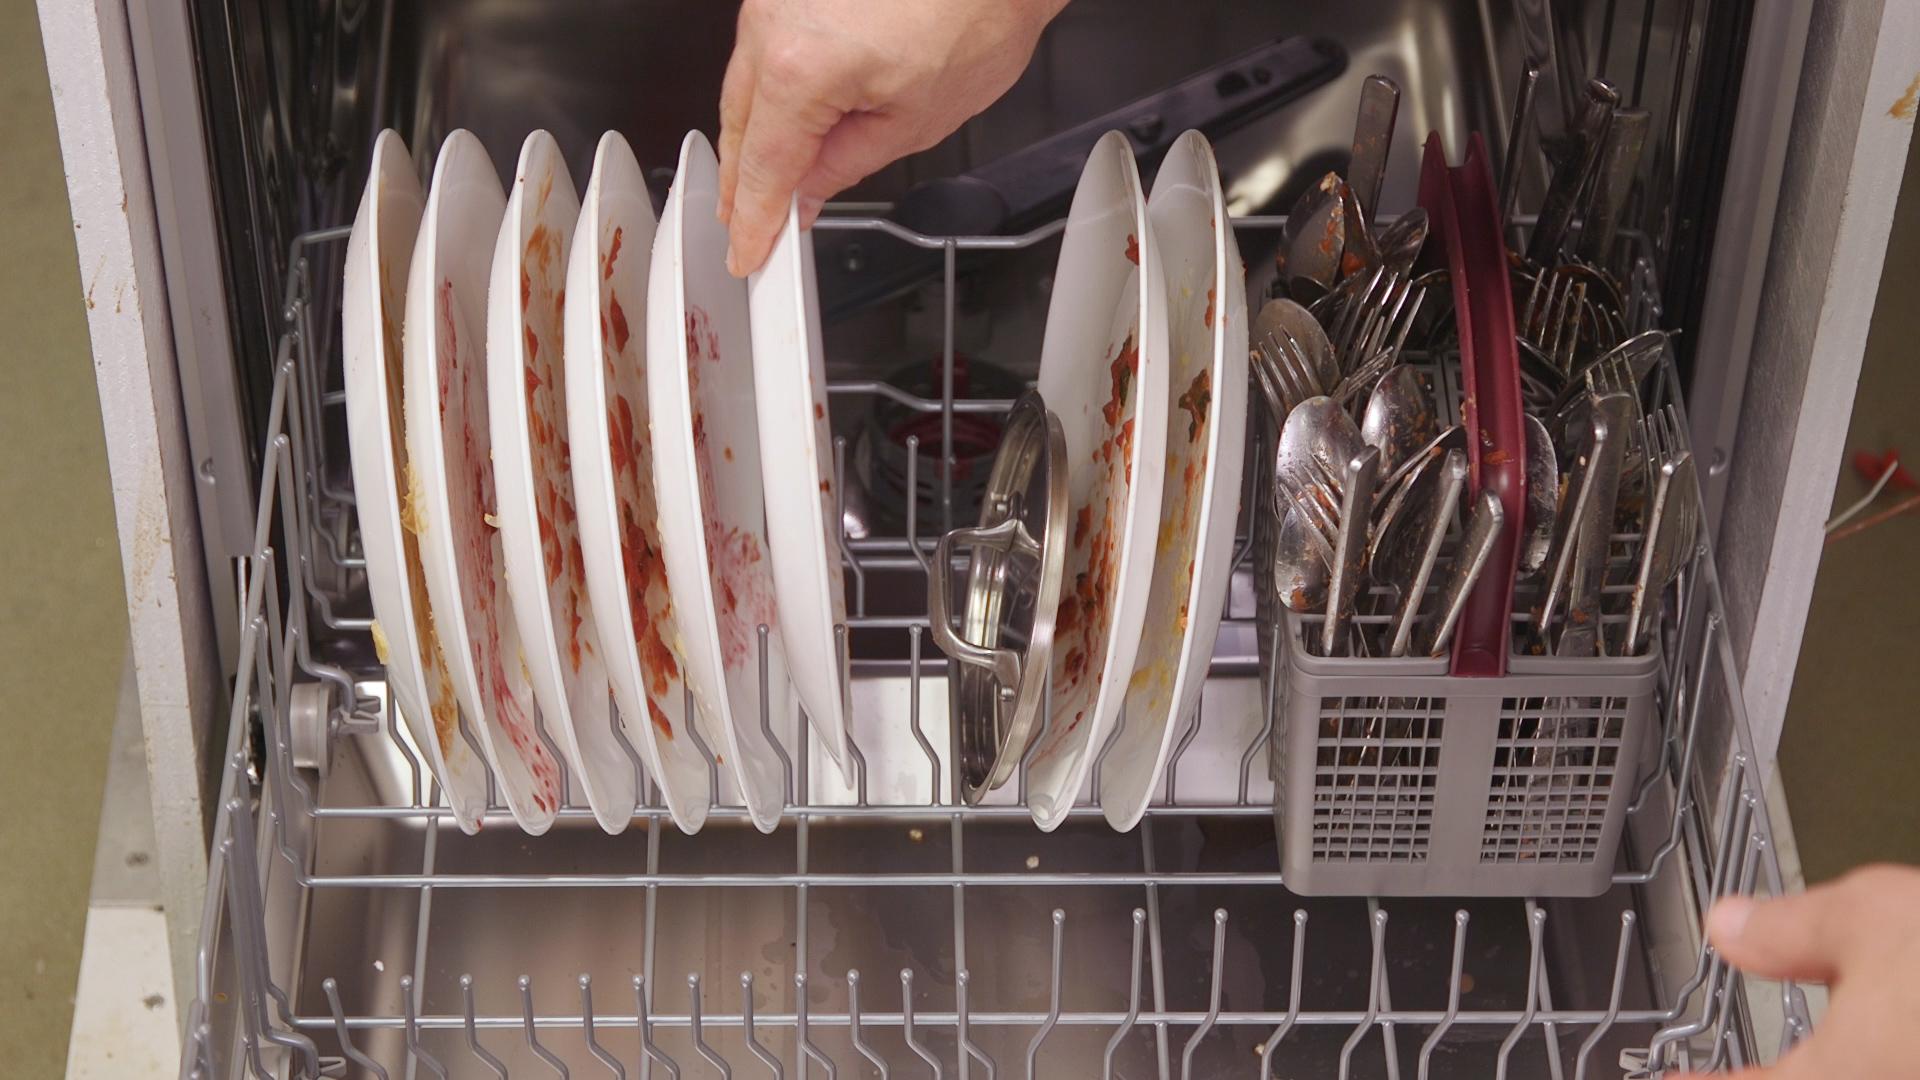 Washing kitchen knives in the dishwasher